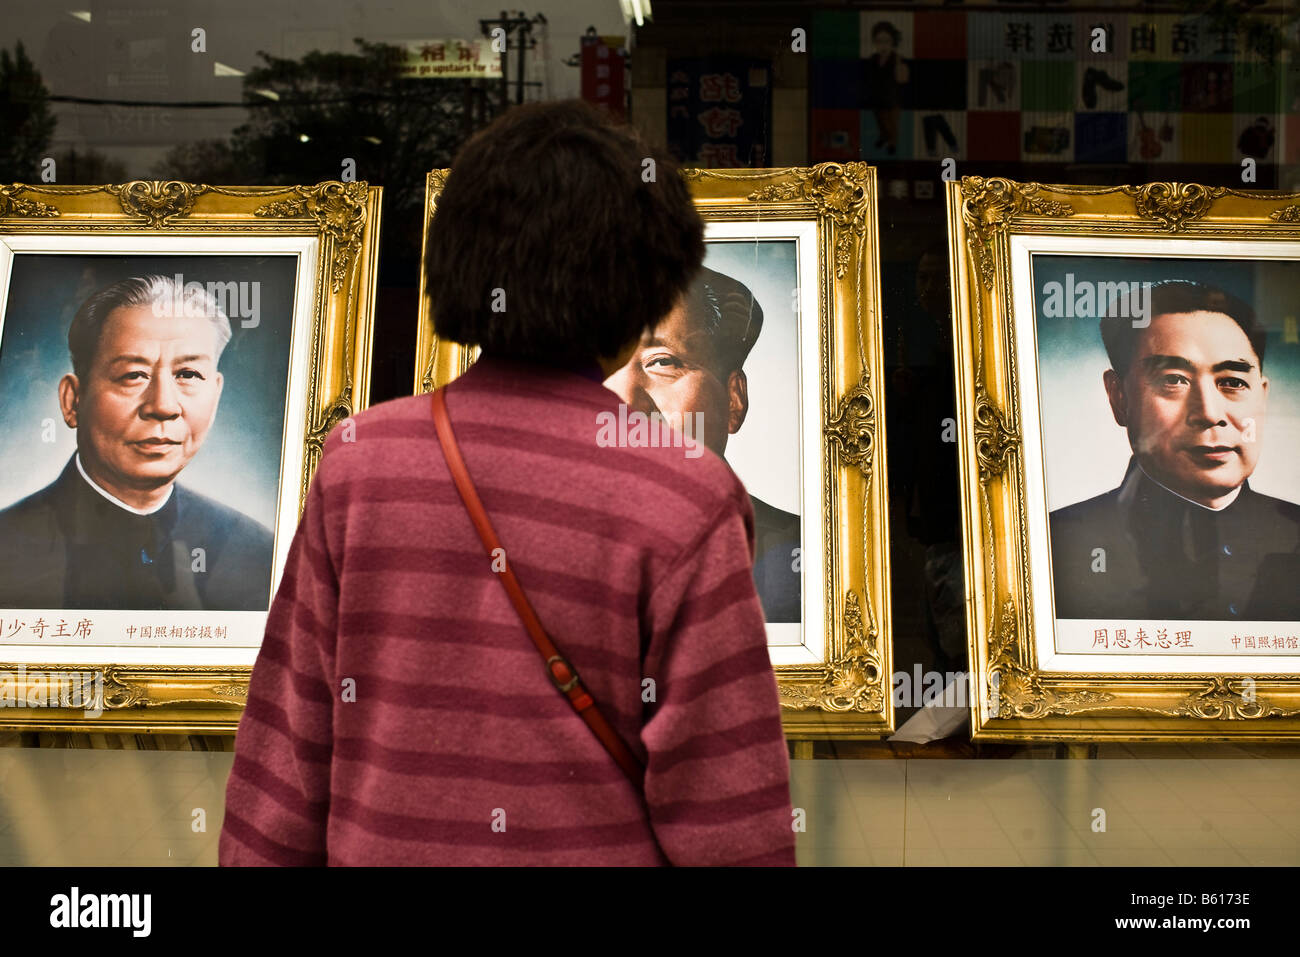 A woman looks at photos of Zhou Enlai Mao Zedongat a busy shopping center in Beijing China in April 2008. Stock Photo